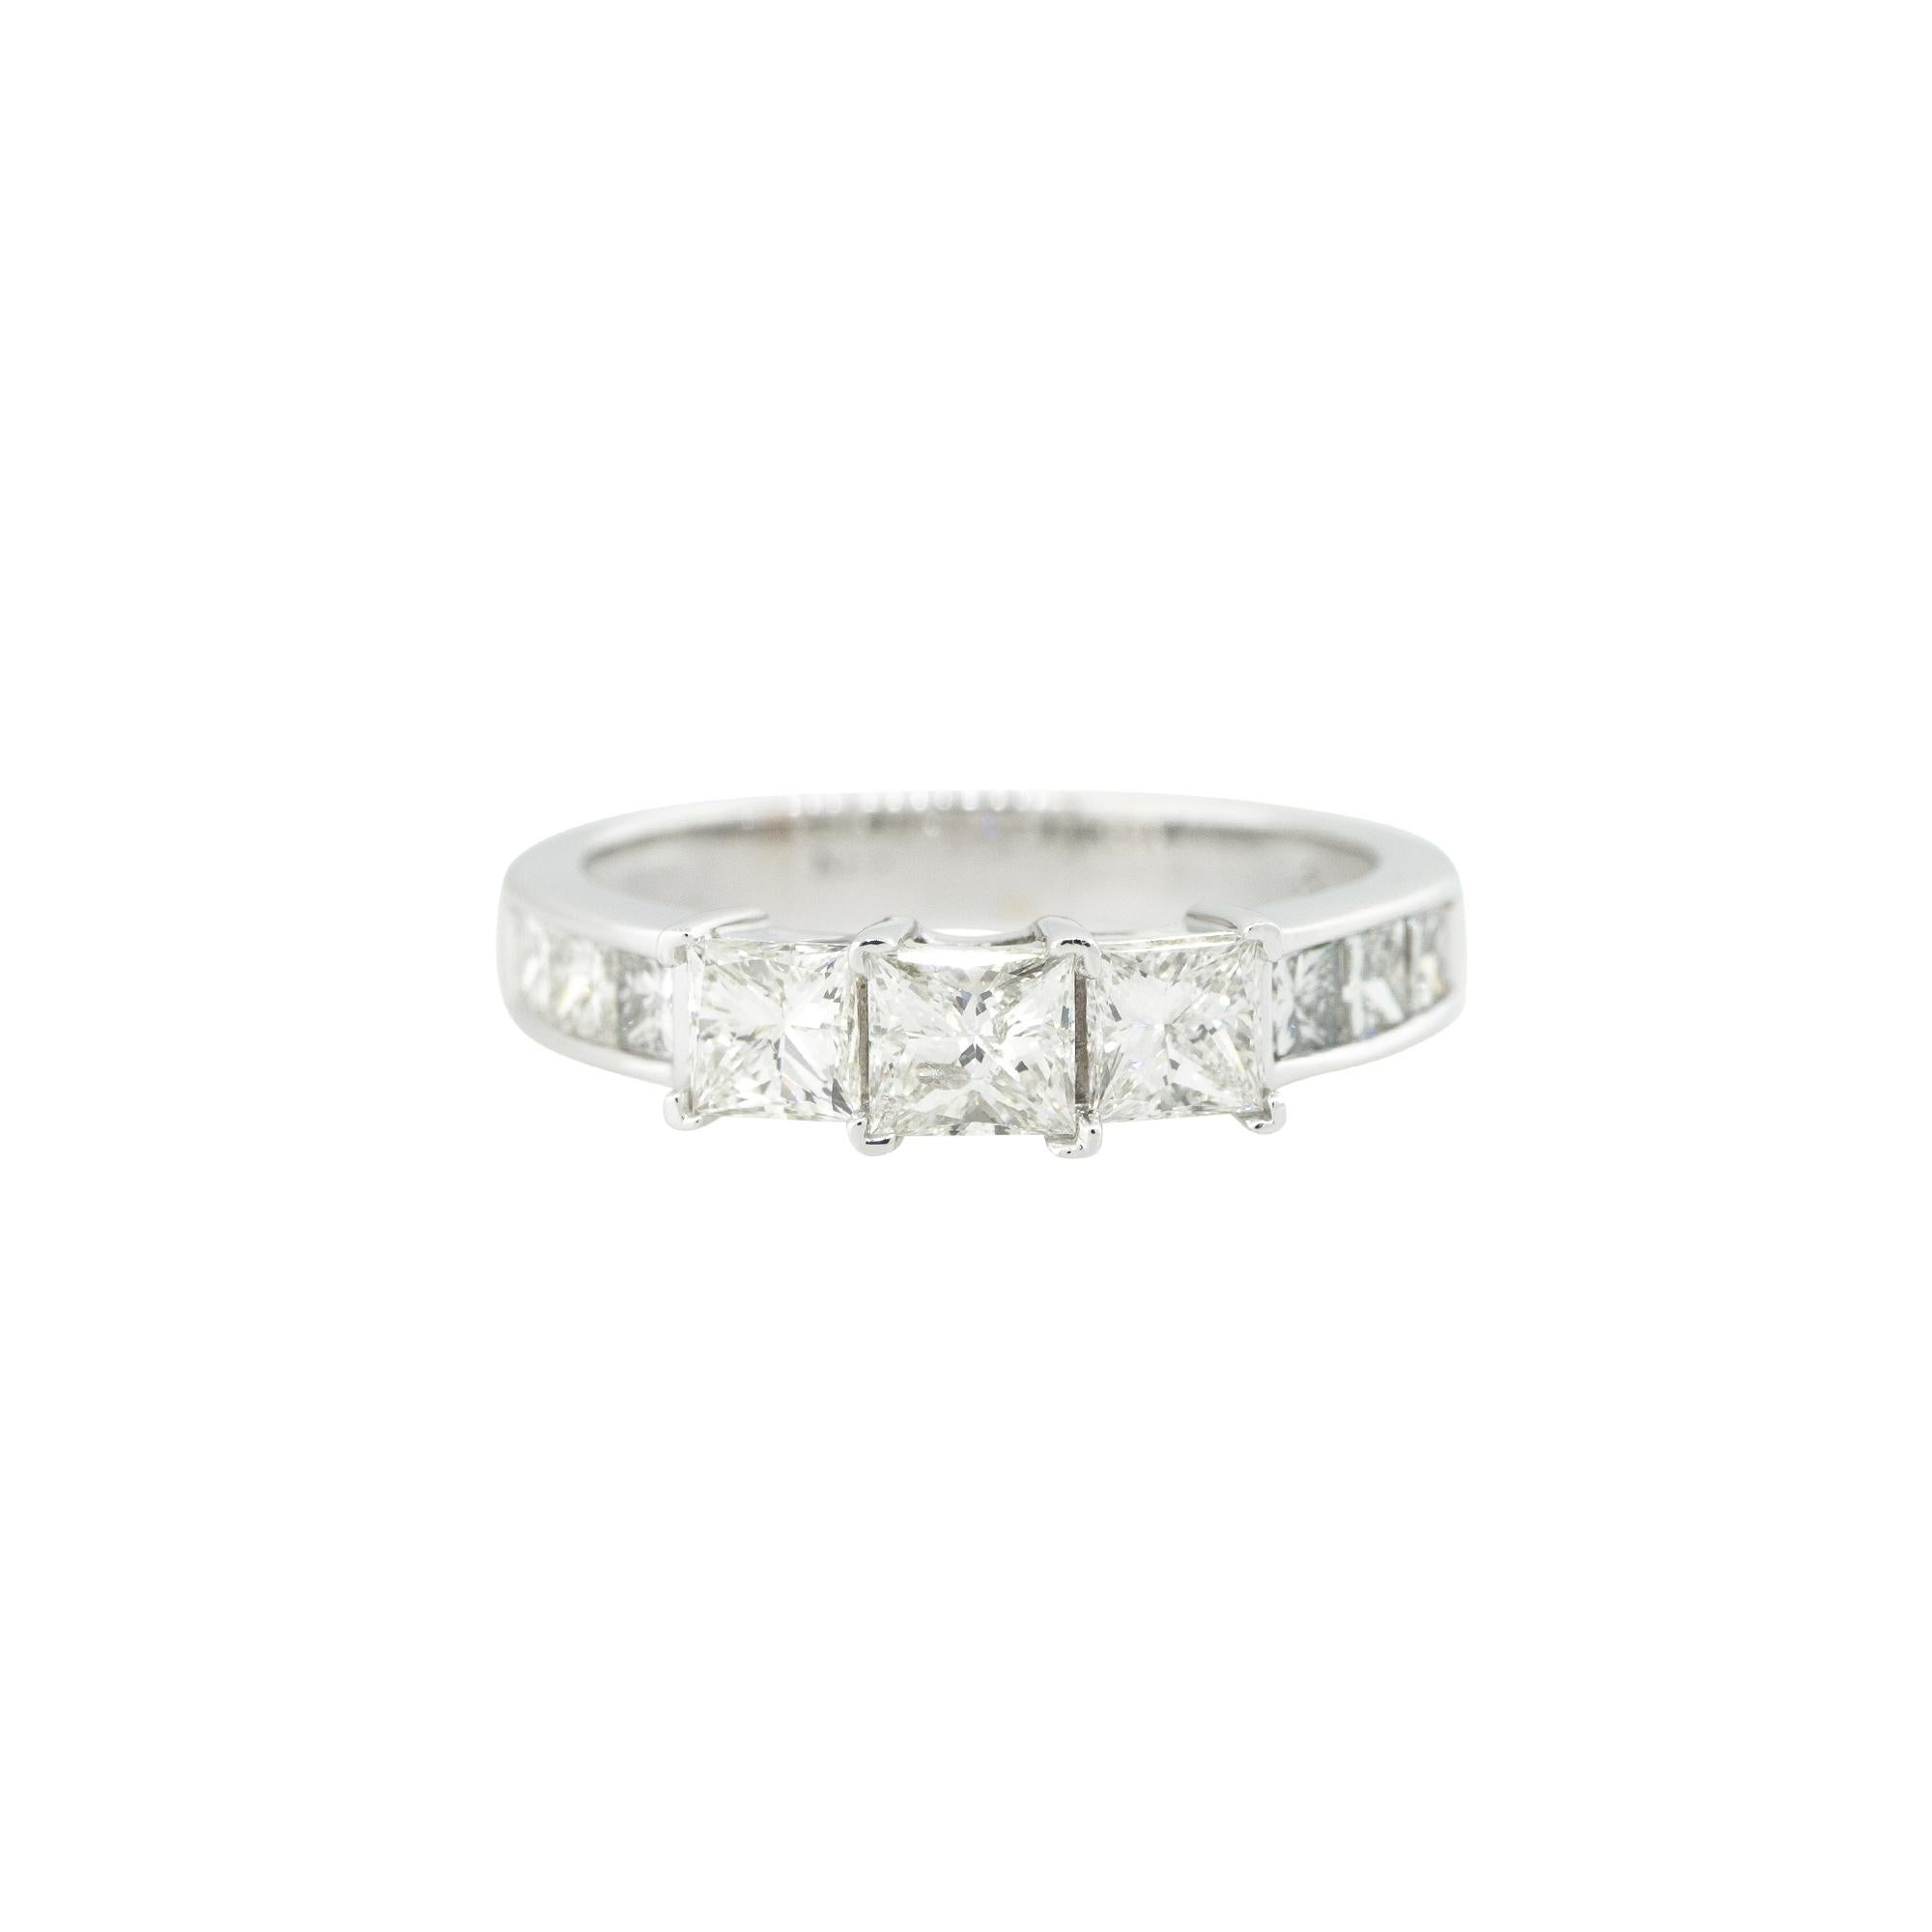 18k White Gold 1.5ctw Princess Cut Diamond Engagement Ring
Style: Women's Diamond Engagement Ring
Material: 18k White Gold
Diamond Details: The 3 larger stones are Princess cut diamonds and there are 6 smaller Princess cut diamonds along the band.